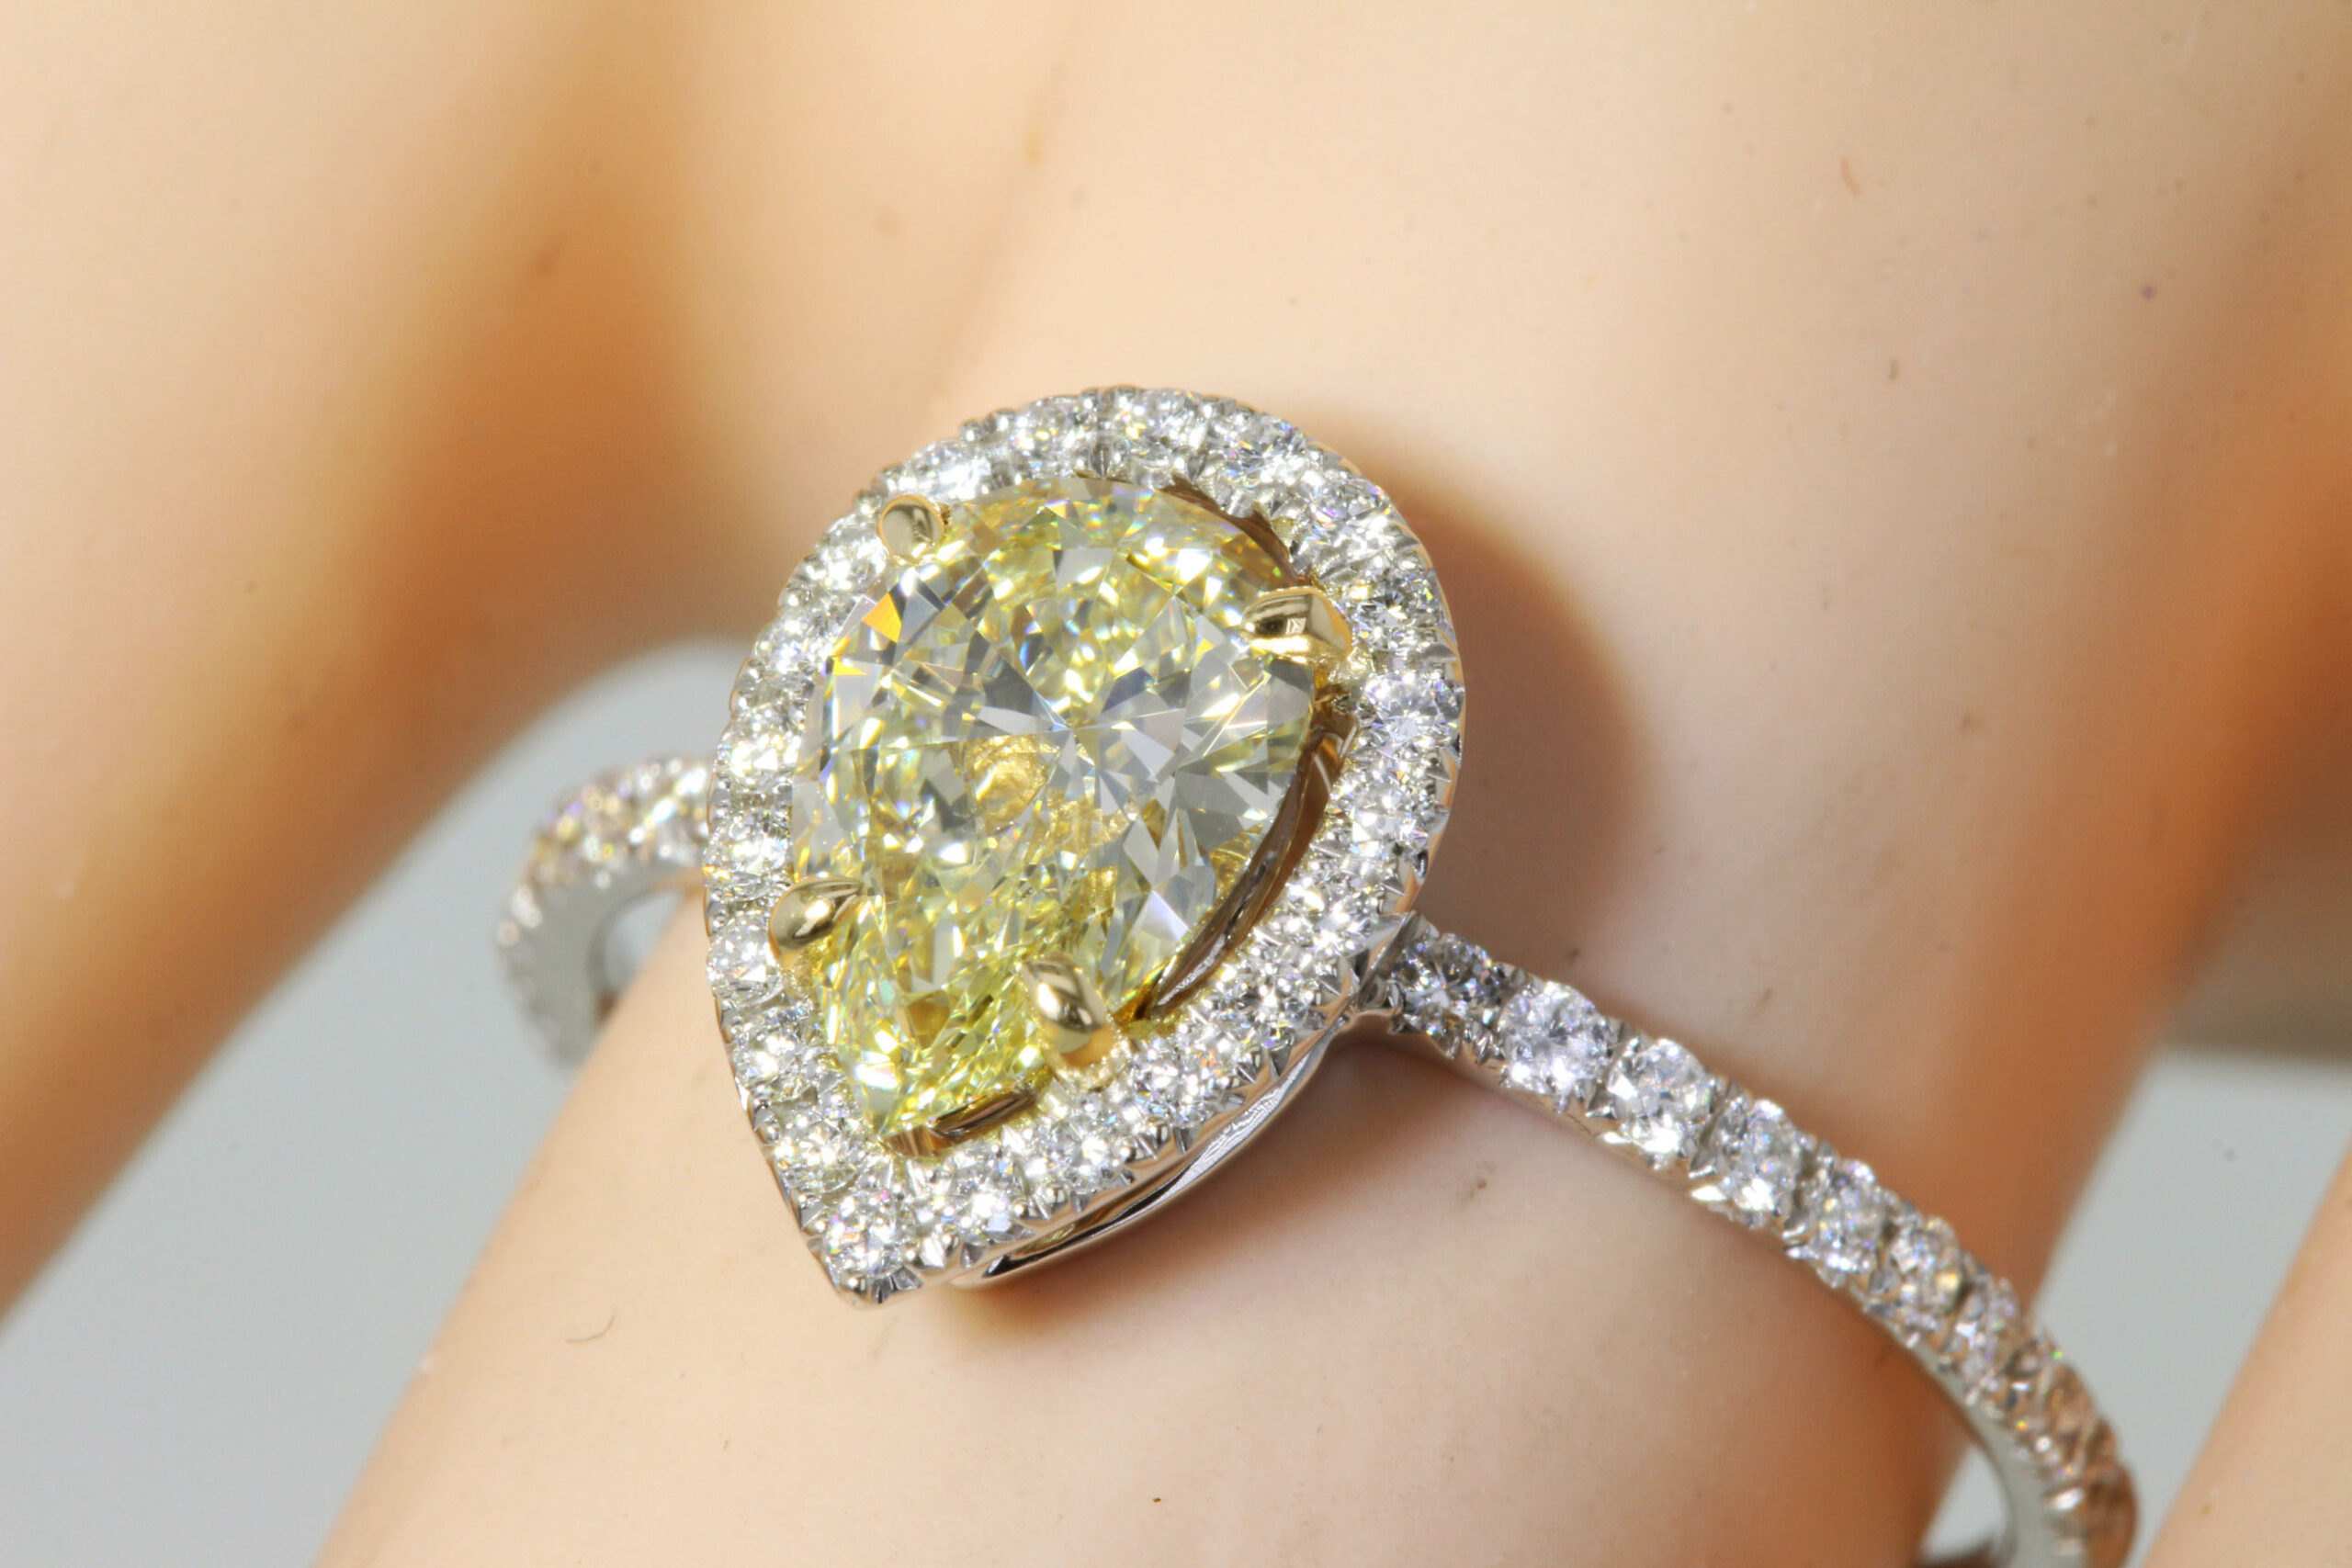 5. "Best Nail Shades for Yellow Diamond Engagement Rings" - wide 1